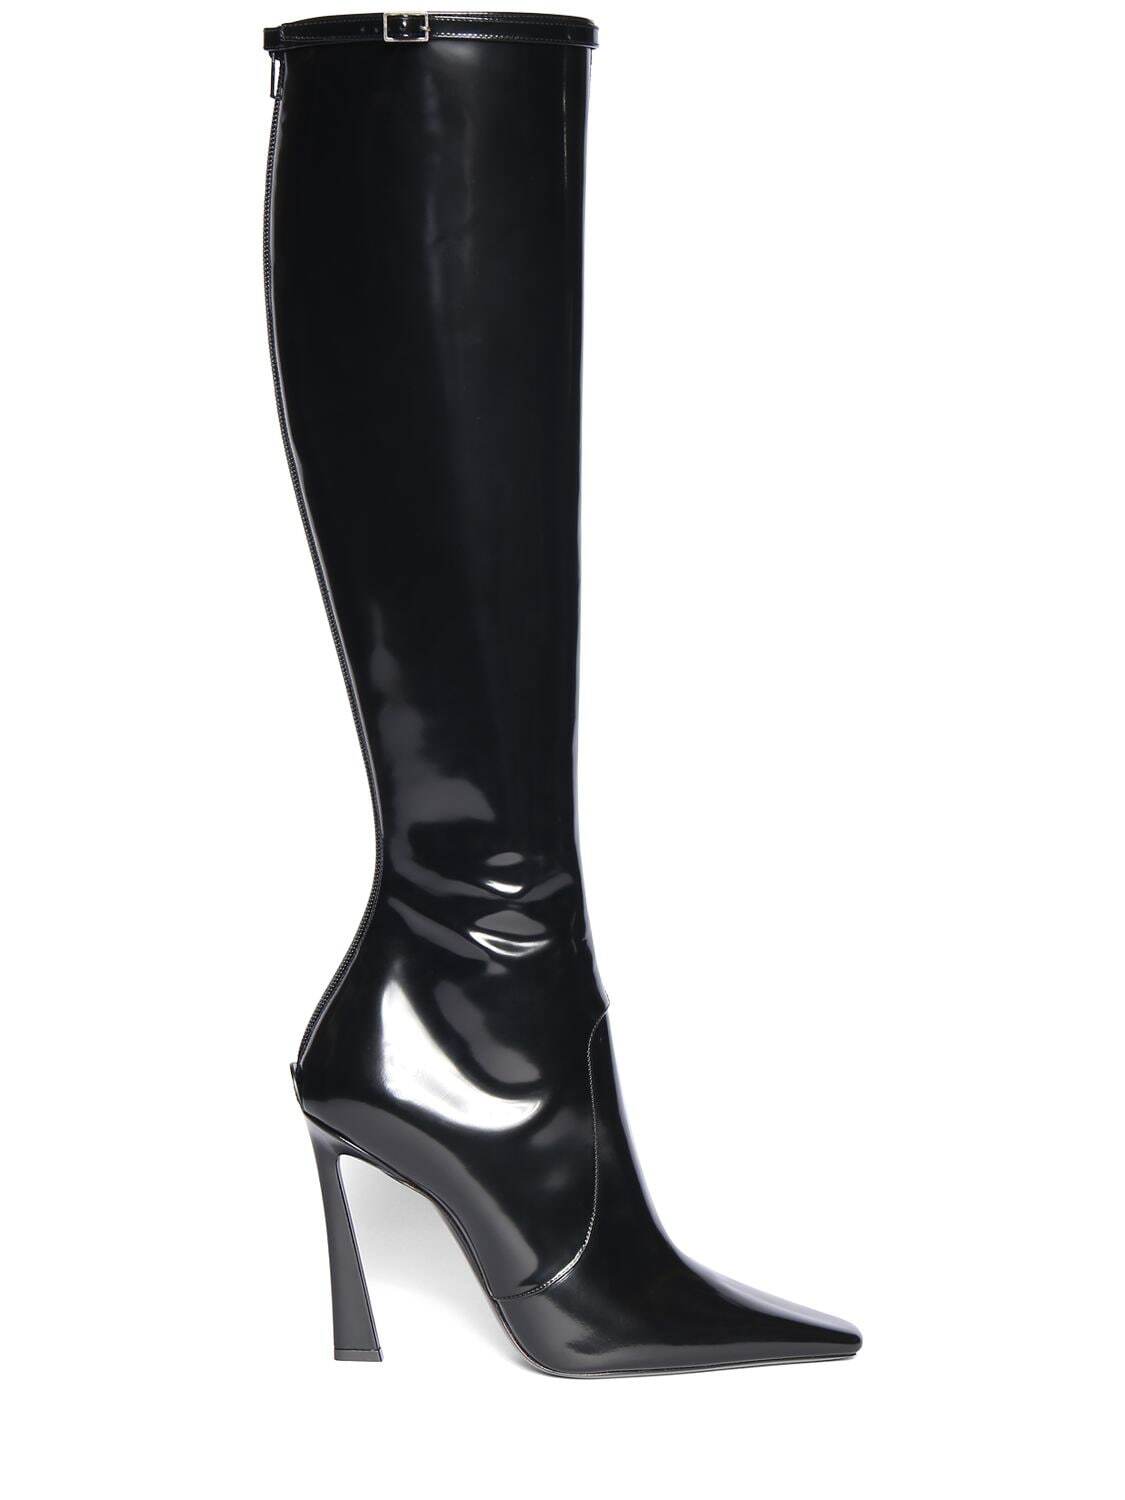 SAINT LAURENT 110mm Tess Patent Leather Tall Boots in black